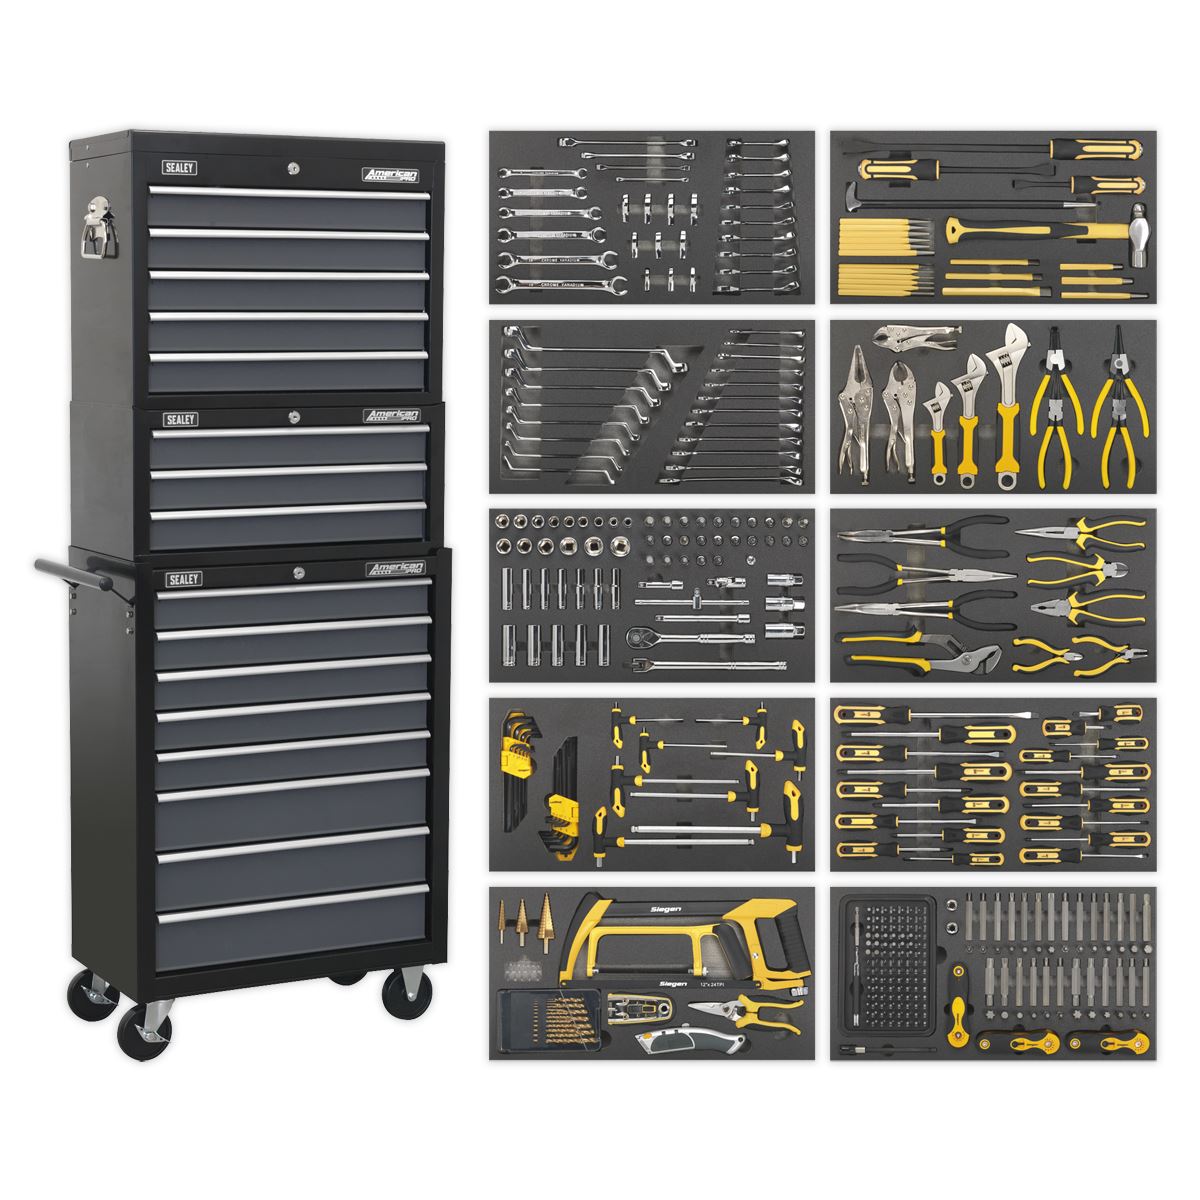 Sealey American Pro Tool Chest Combination 16 Drawer with Ball-Bearing Slides - Black/Grey & 468pc Tool Kit